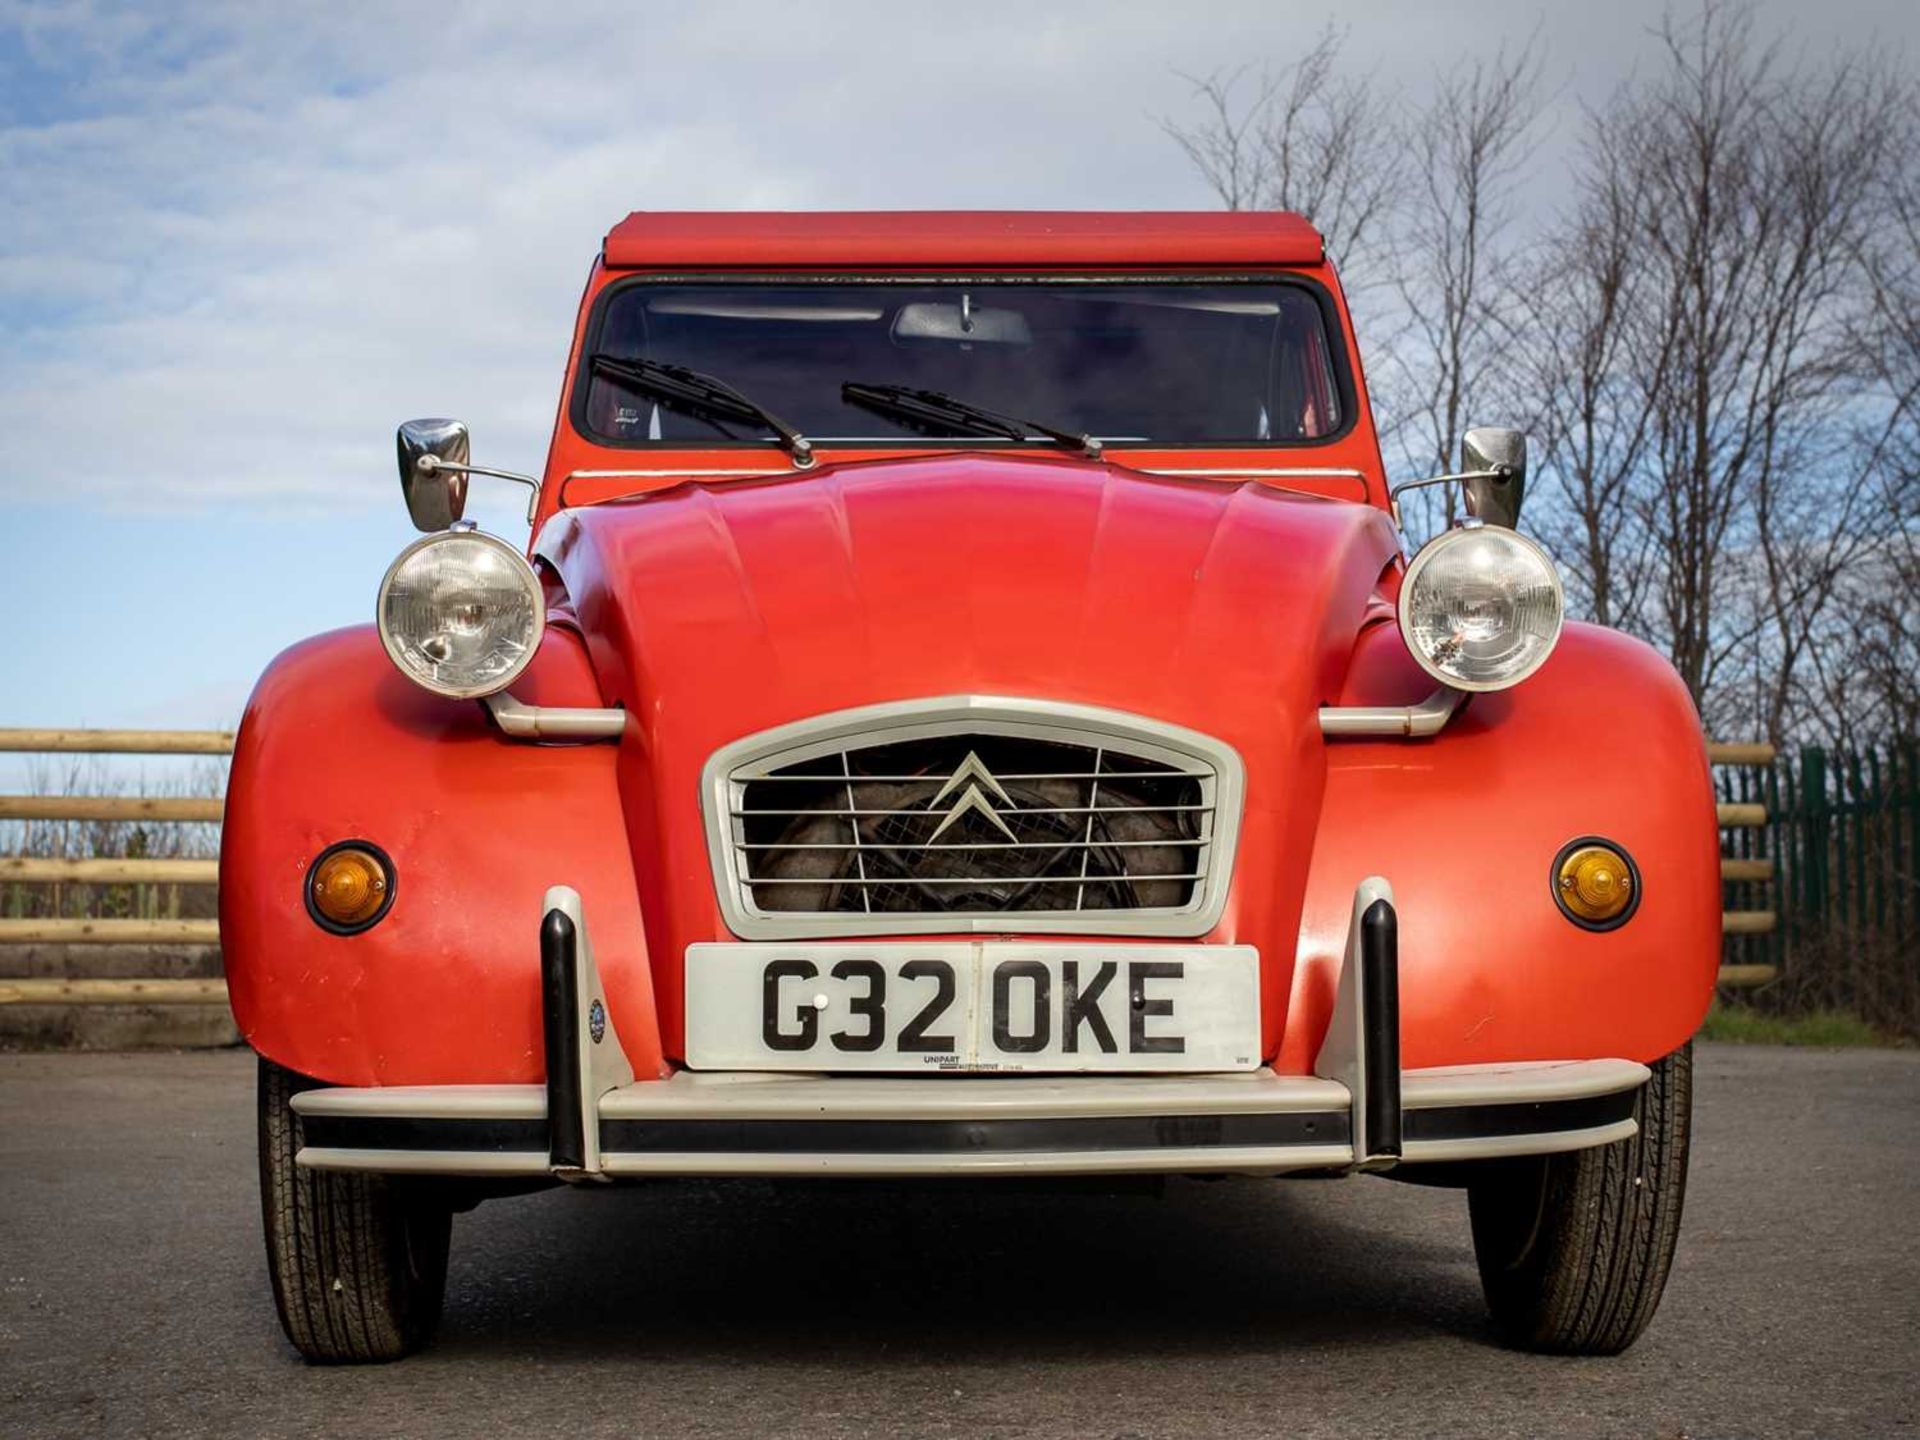 1989 Citroën 2CV6 Spécial Believed to have covered a credible 15,000 miles - Image 4 of 113